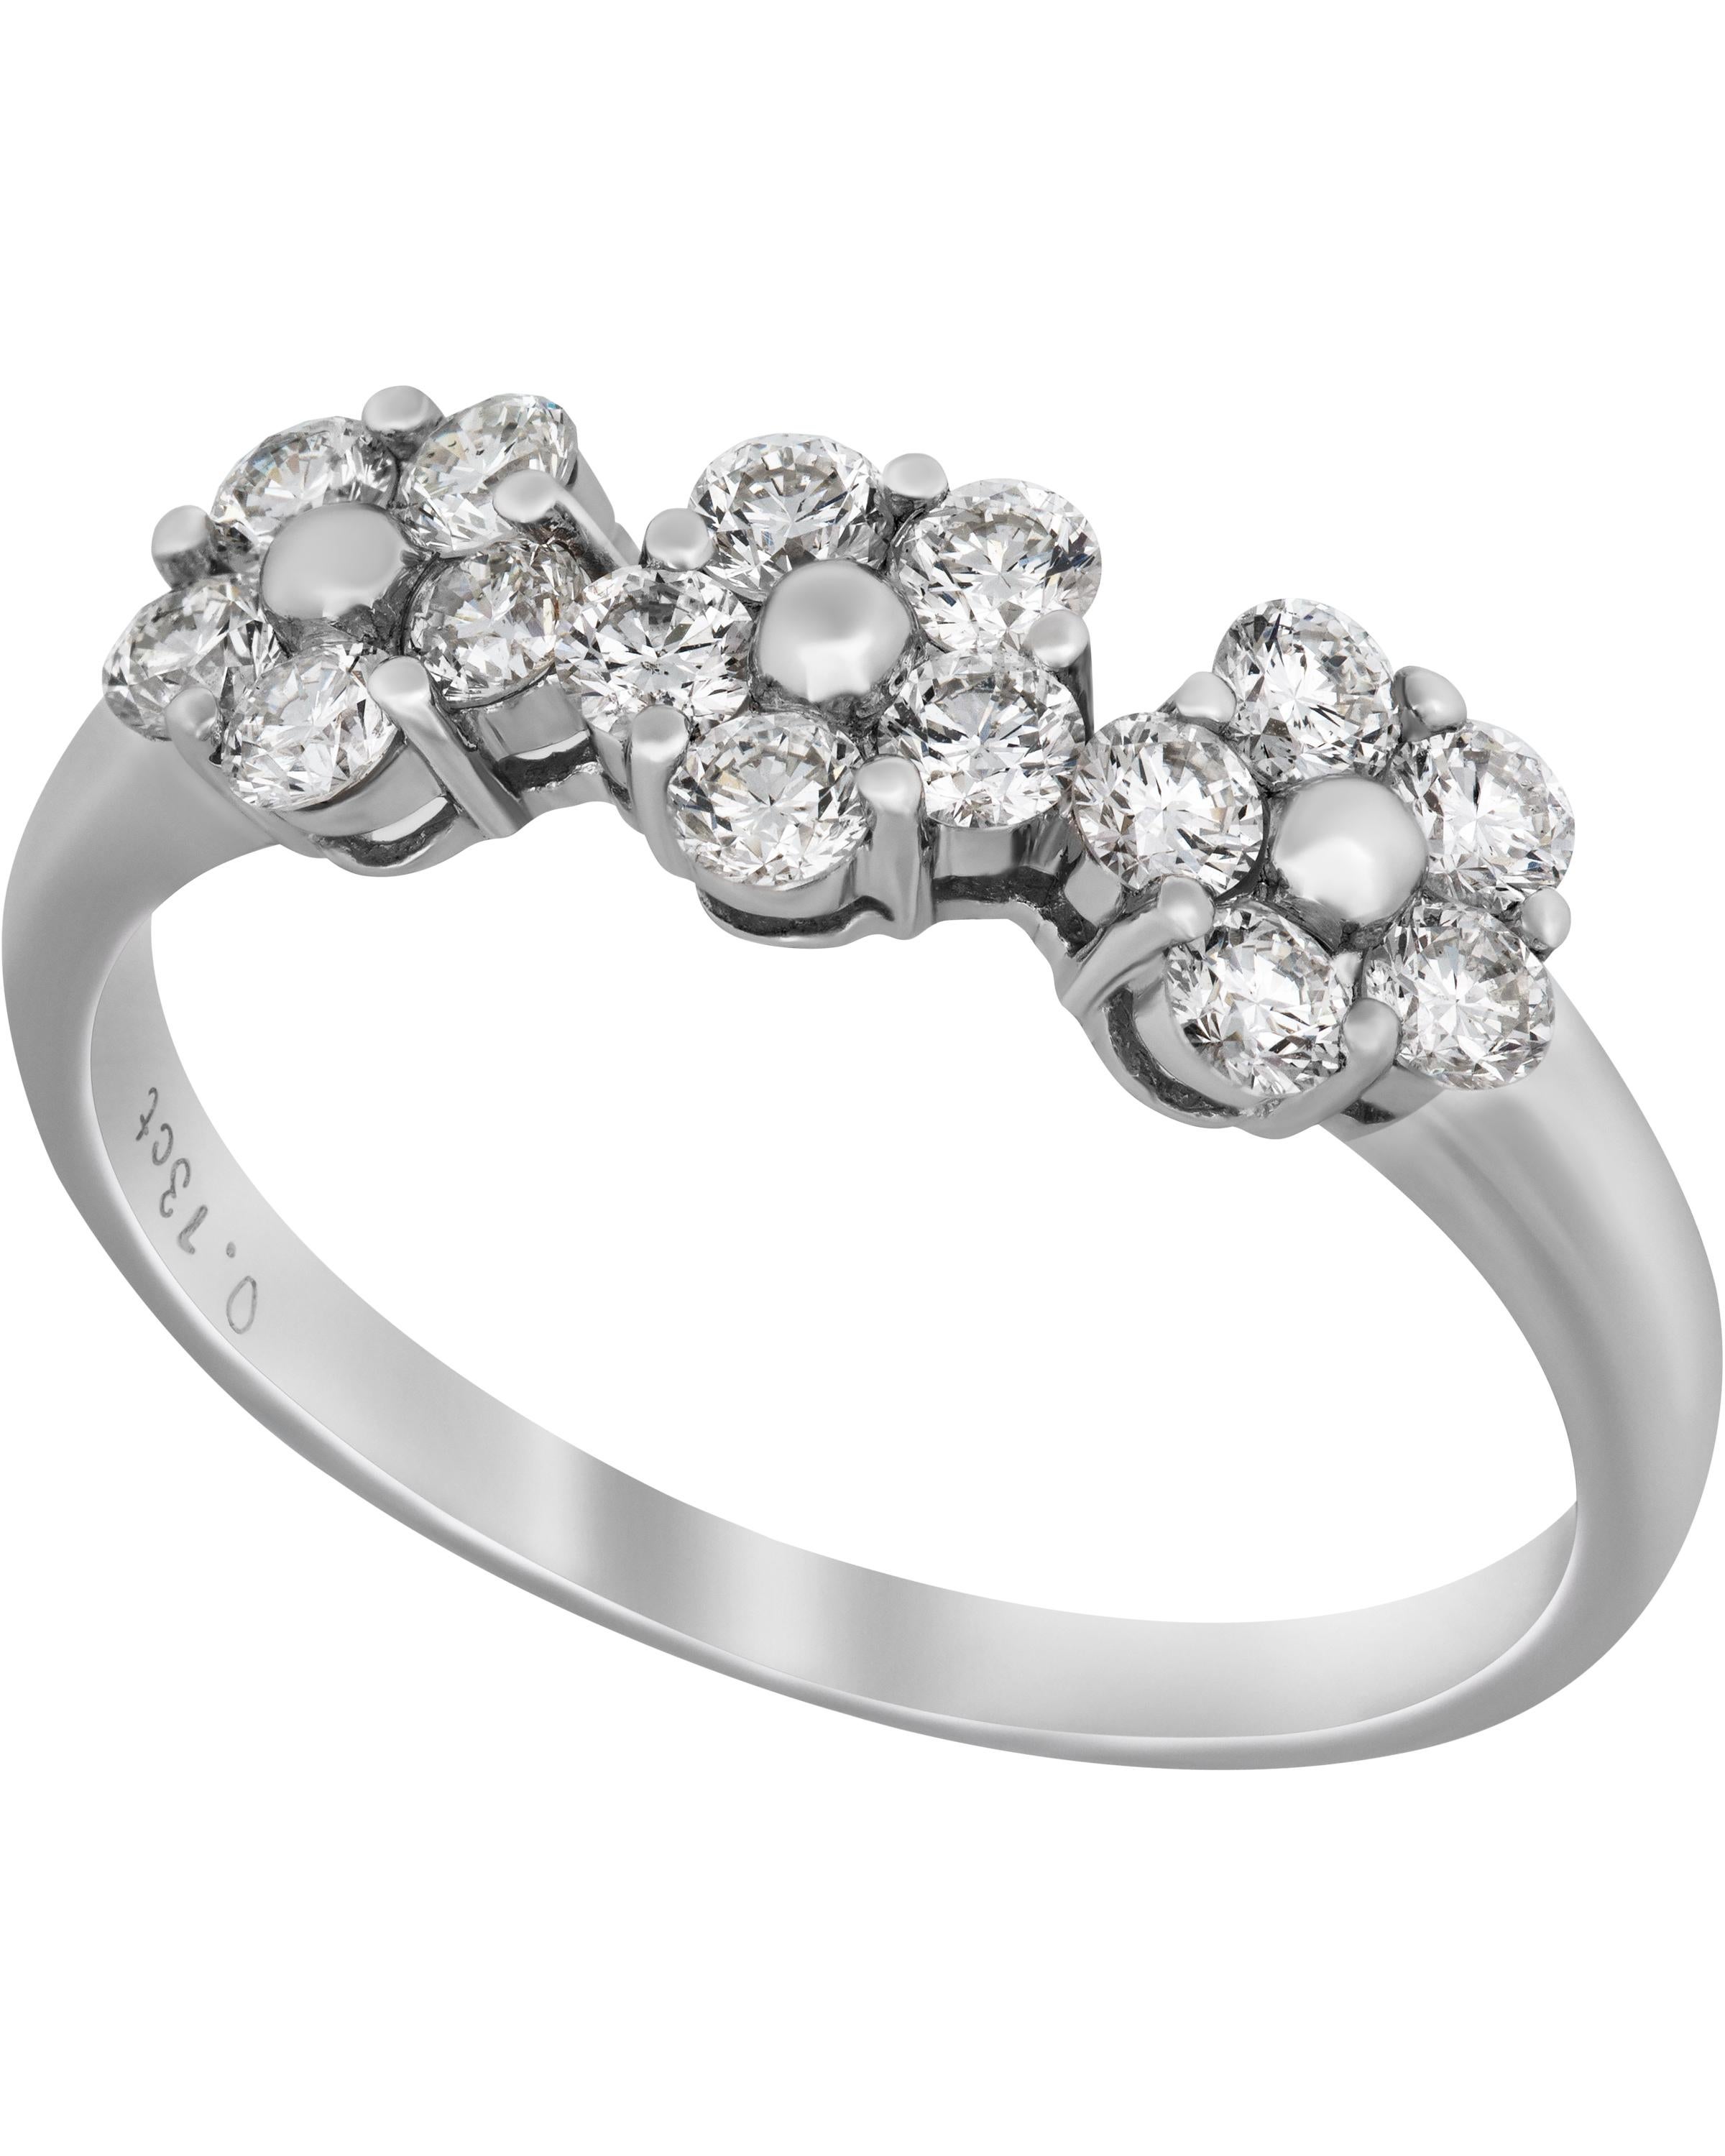 This beautiful Piero Milano 18K White Gold Band Ring features three glistening diamond flowers 0.73ct. tw. adorned with a beaded center of 18K White Gold. The ring size is 7.5 (55.7). The Band Width is 5.9mm. The Weight is 2.8g.
